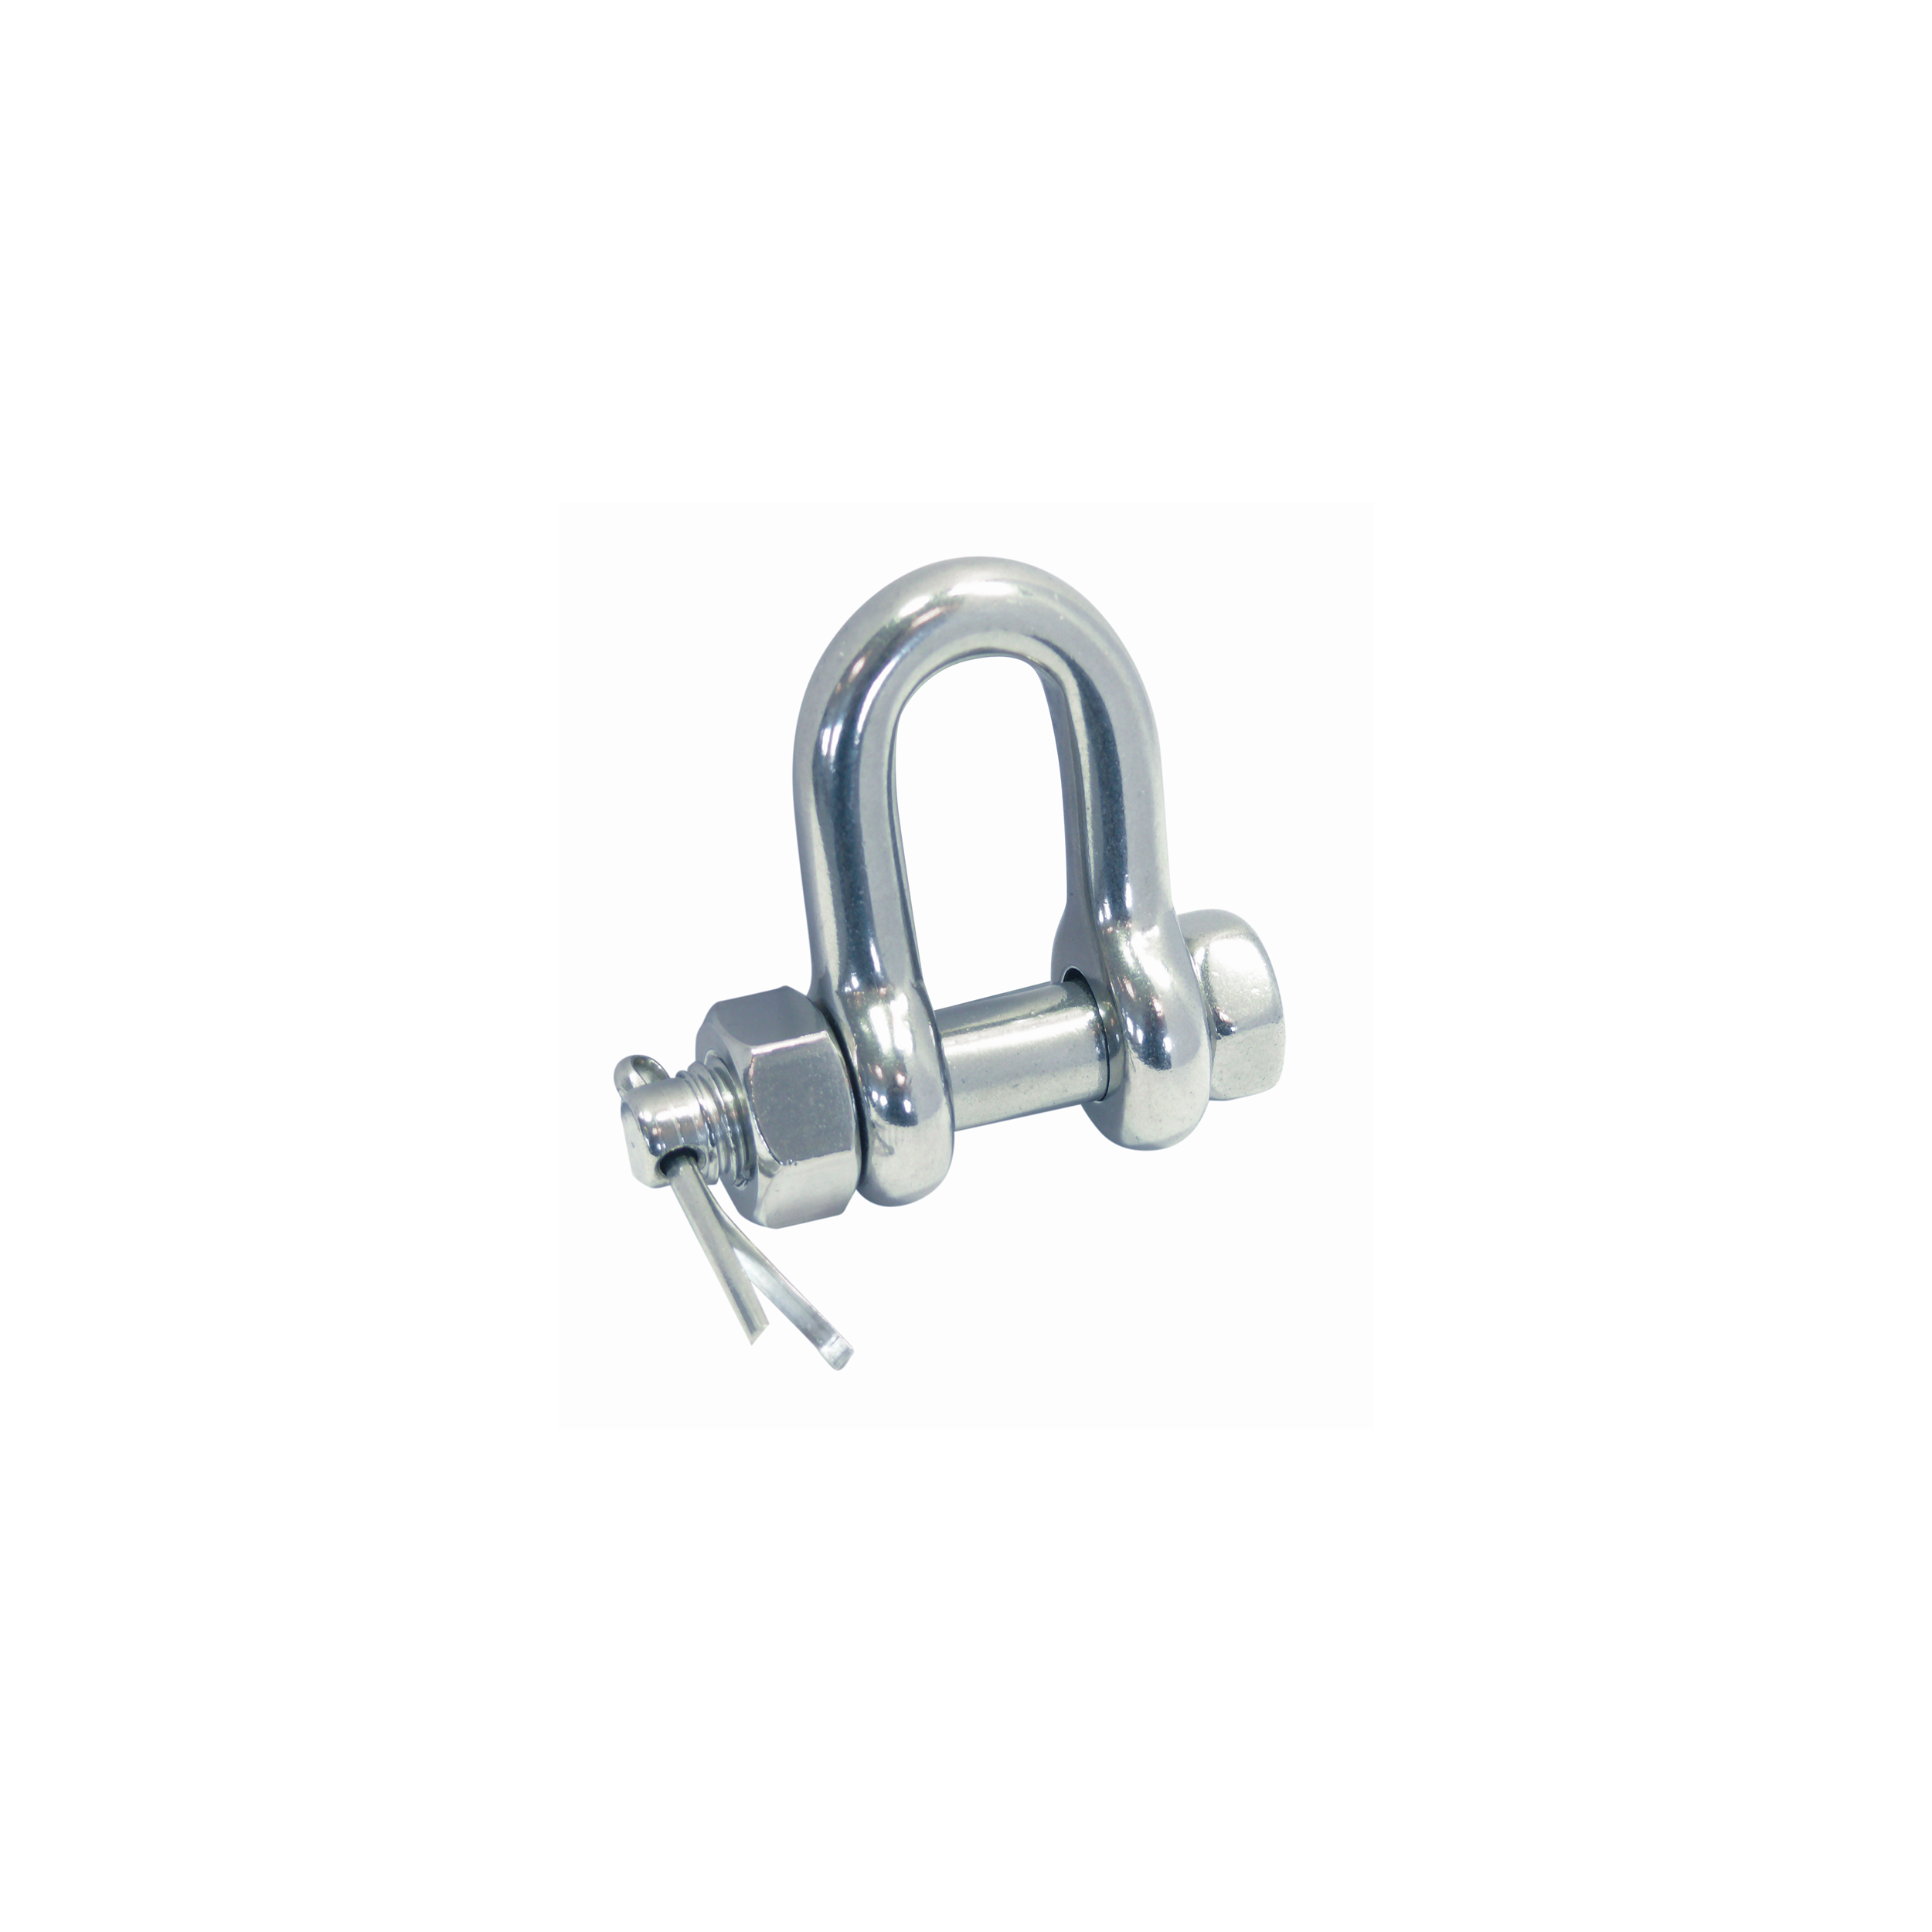 D-shackle with secure bolt A4  bolt 11mm, bow 10mm